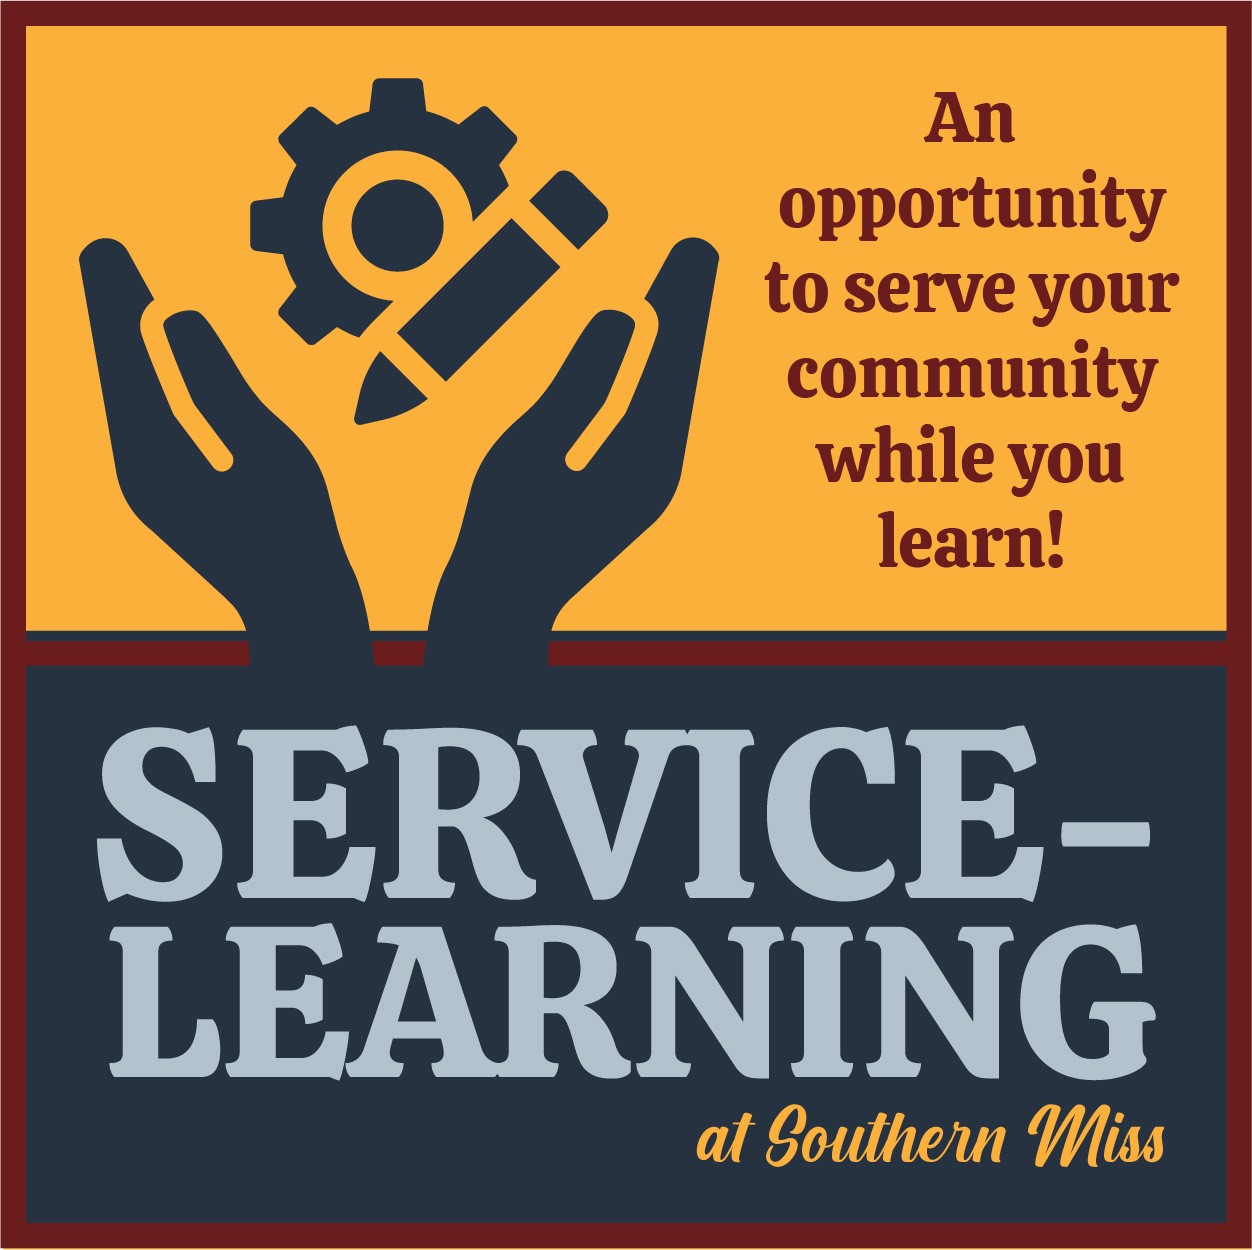 Graphic reads "An opportunity to serve while you learn"